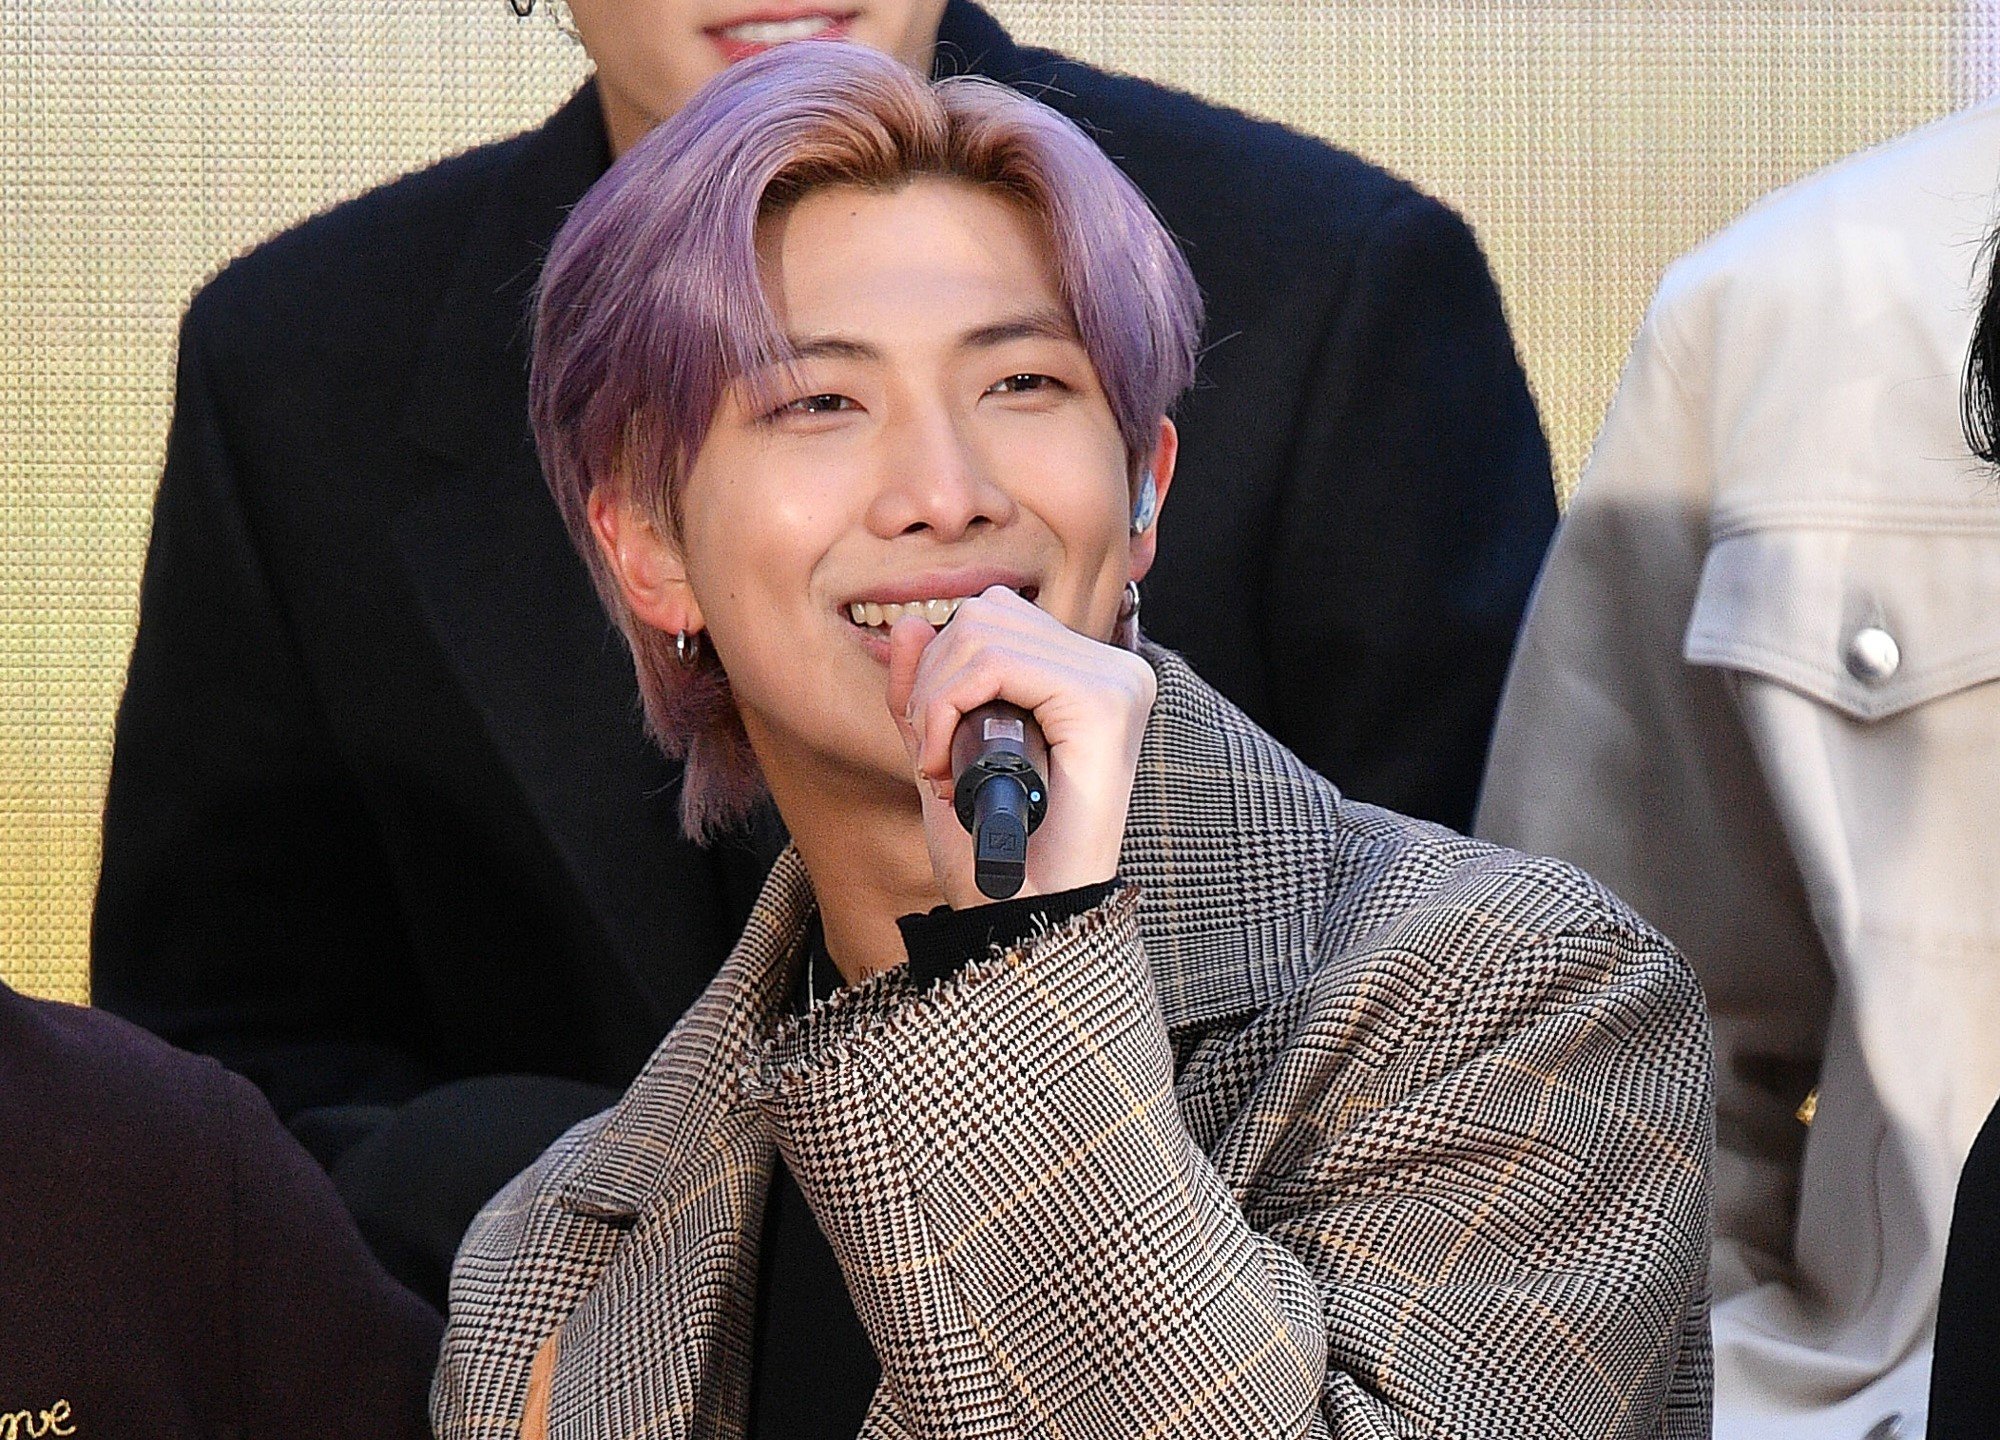 RM of BTS on the 'Today' Show in 2020 to promote 'Map of the Soul: 7'